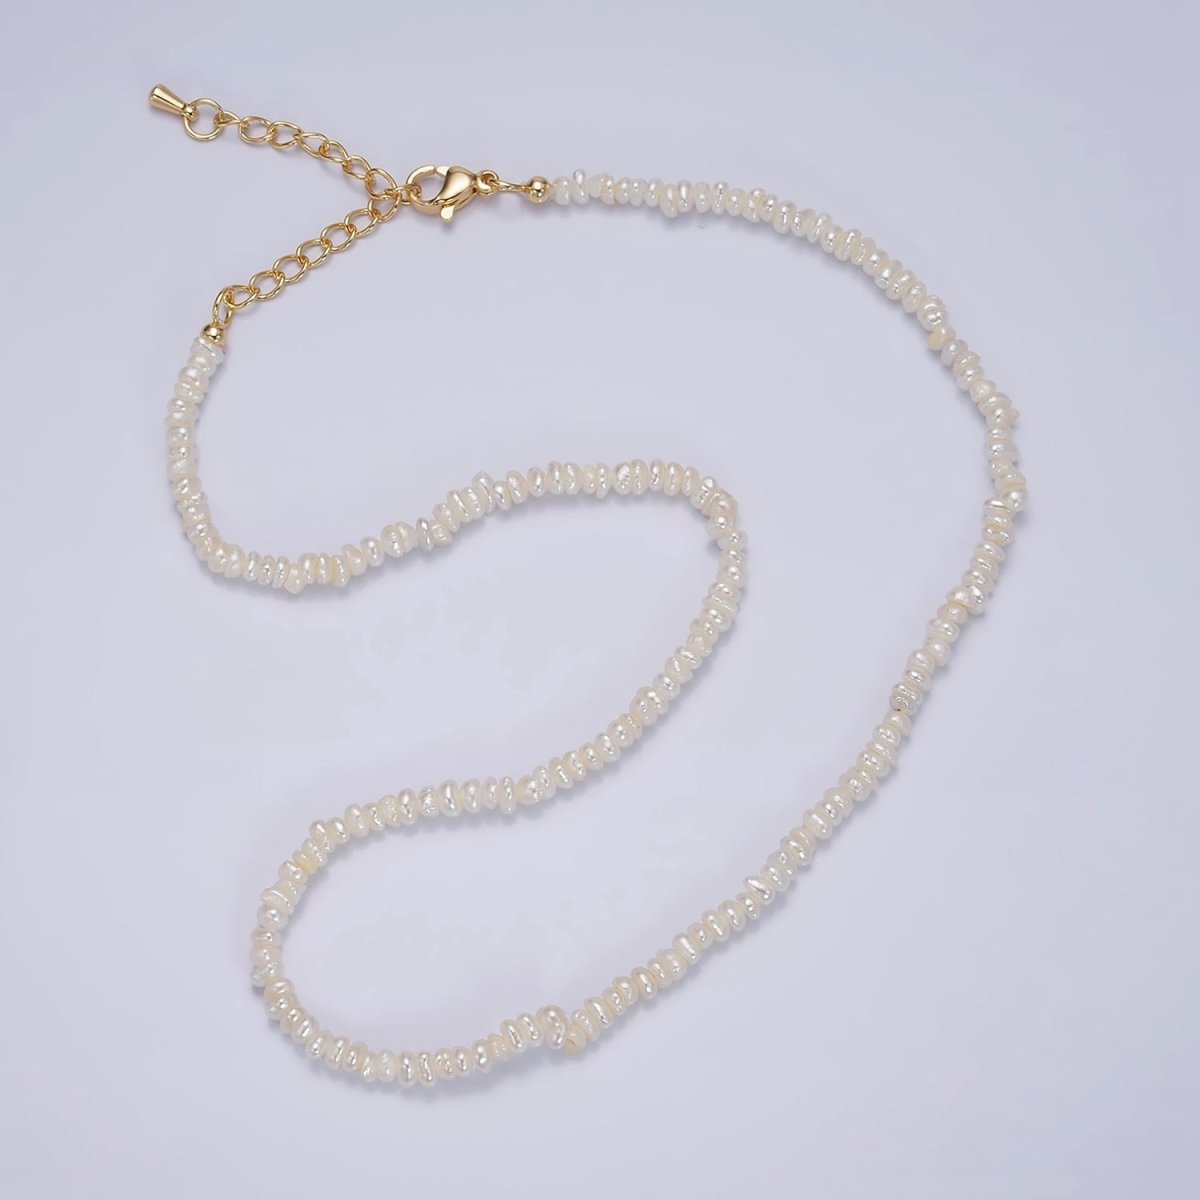 16K Gold Filled 3mm Button Biwa Ringed Freshwater Pearls 15 Inch Choker Necklace w. Extender | WA-1989 Clearance Pricing - DLUXCA